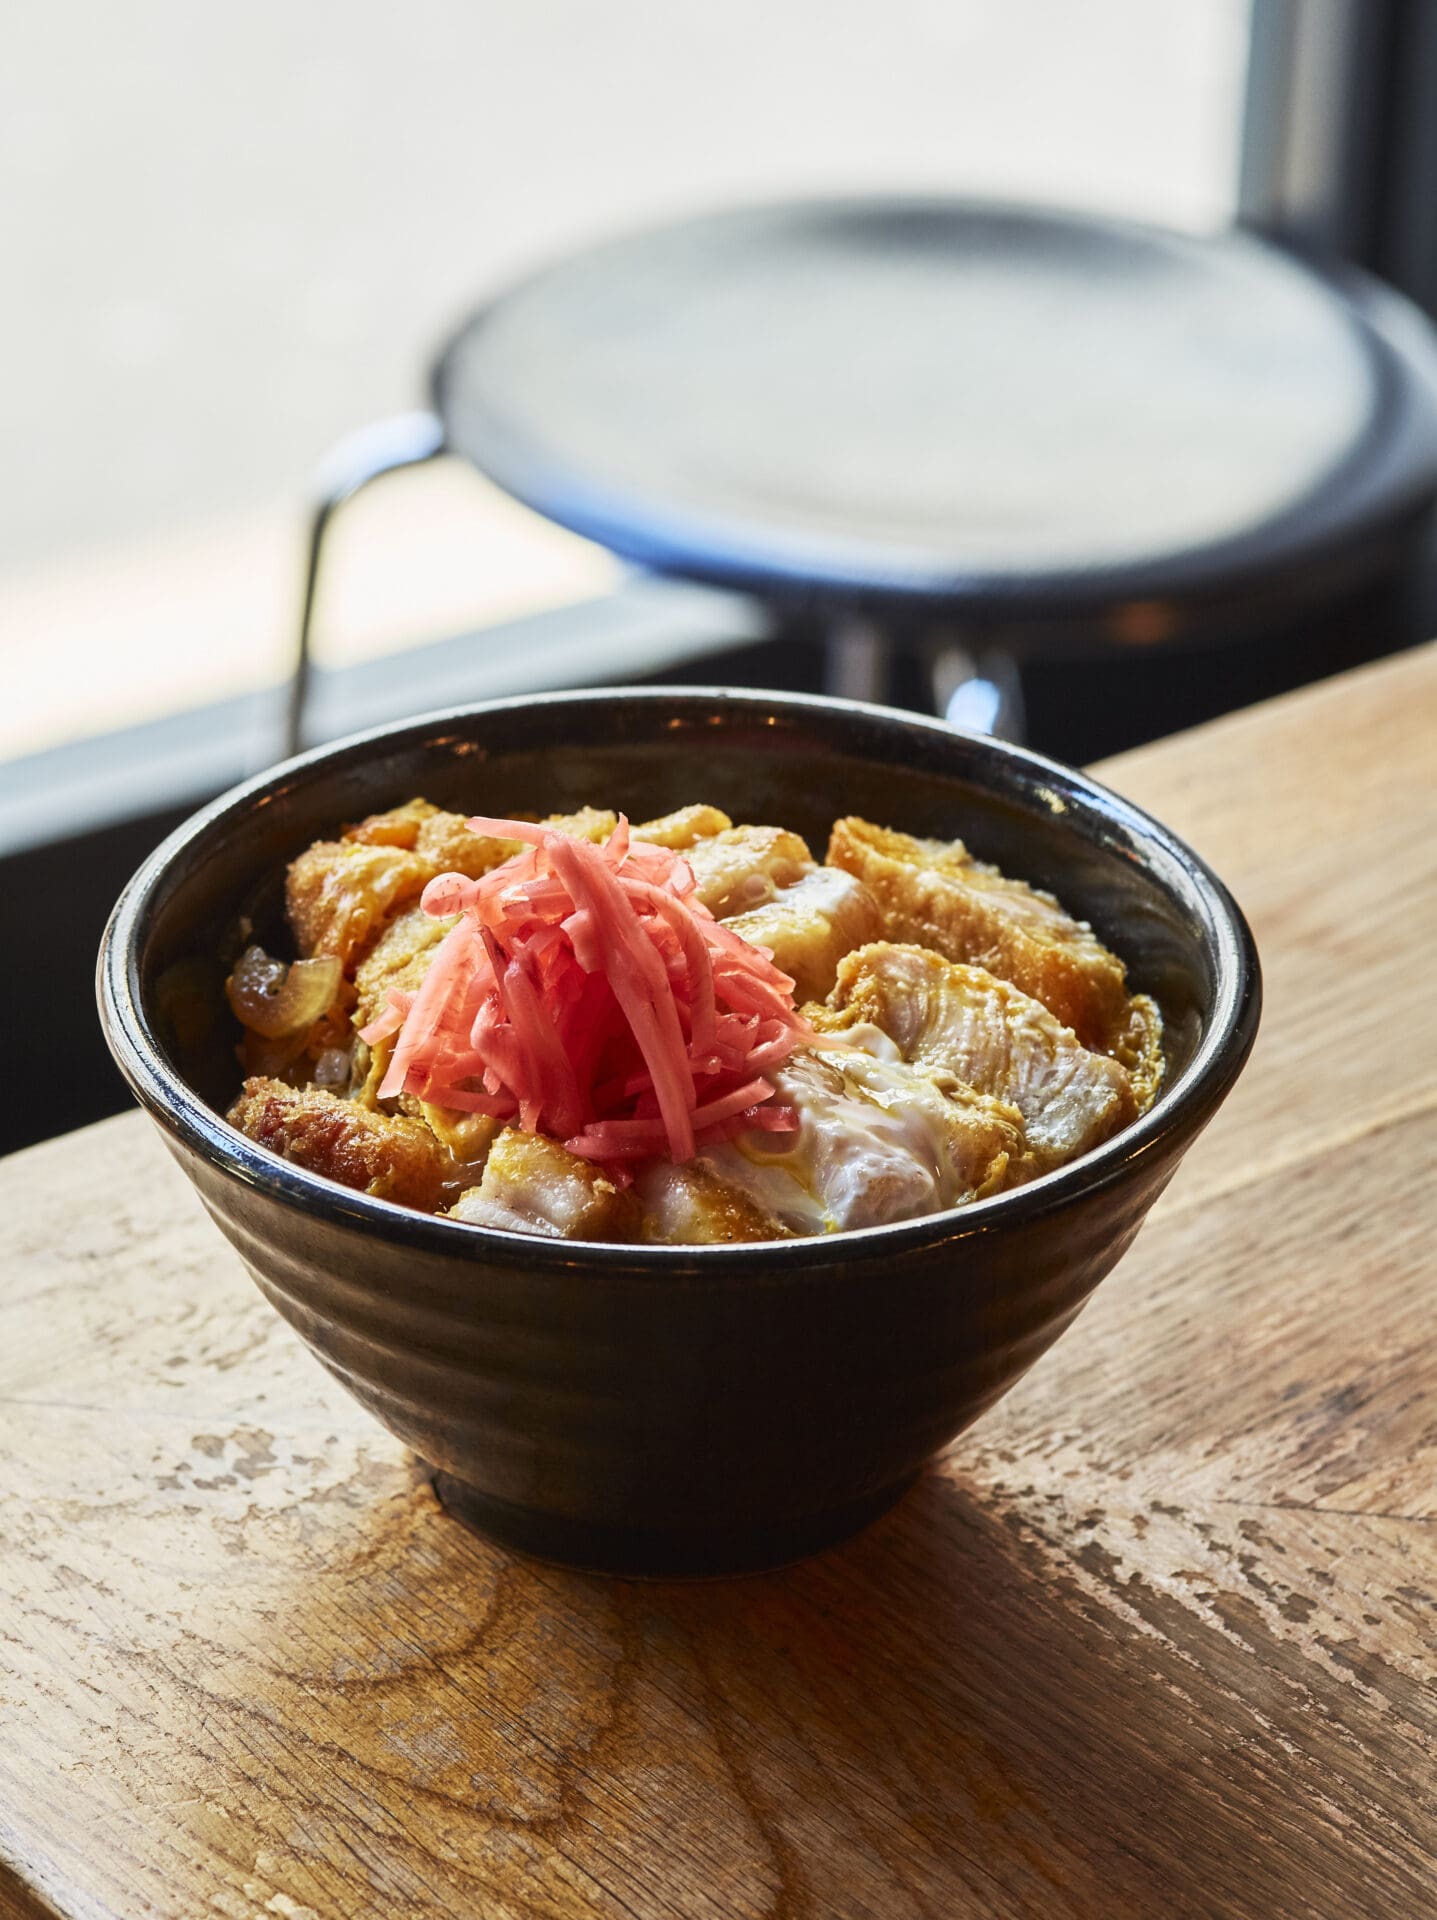 Shuko Oda | Koya Ko's katsu udon, in a brown ceramic bowl and topped with bright-pink pickles